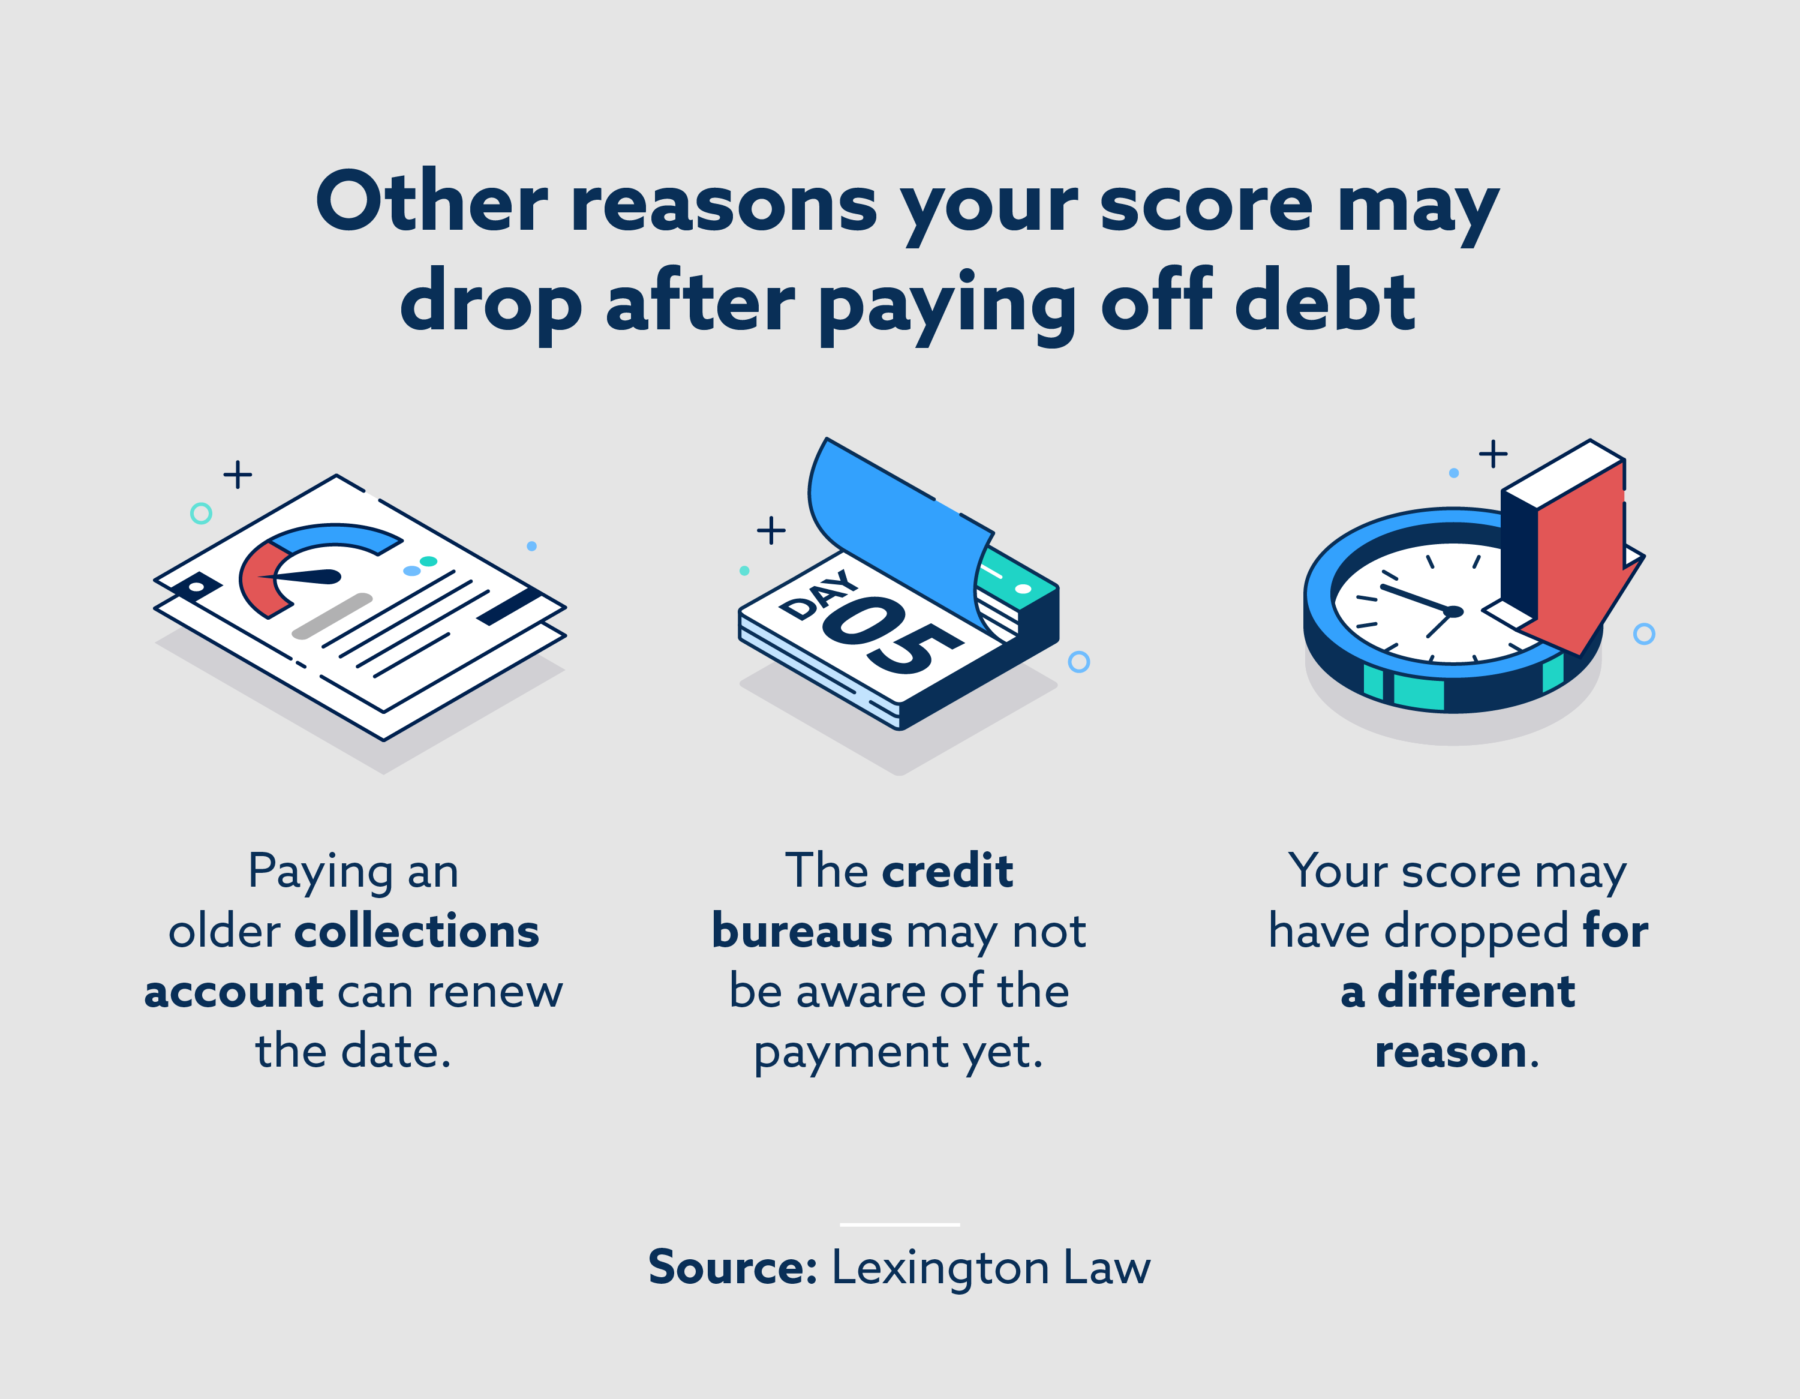 Other reasons your score may drop after paying off debt